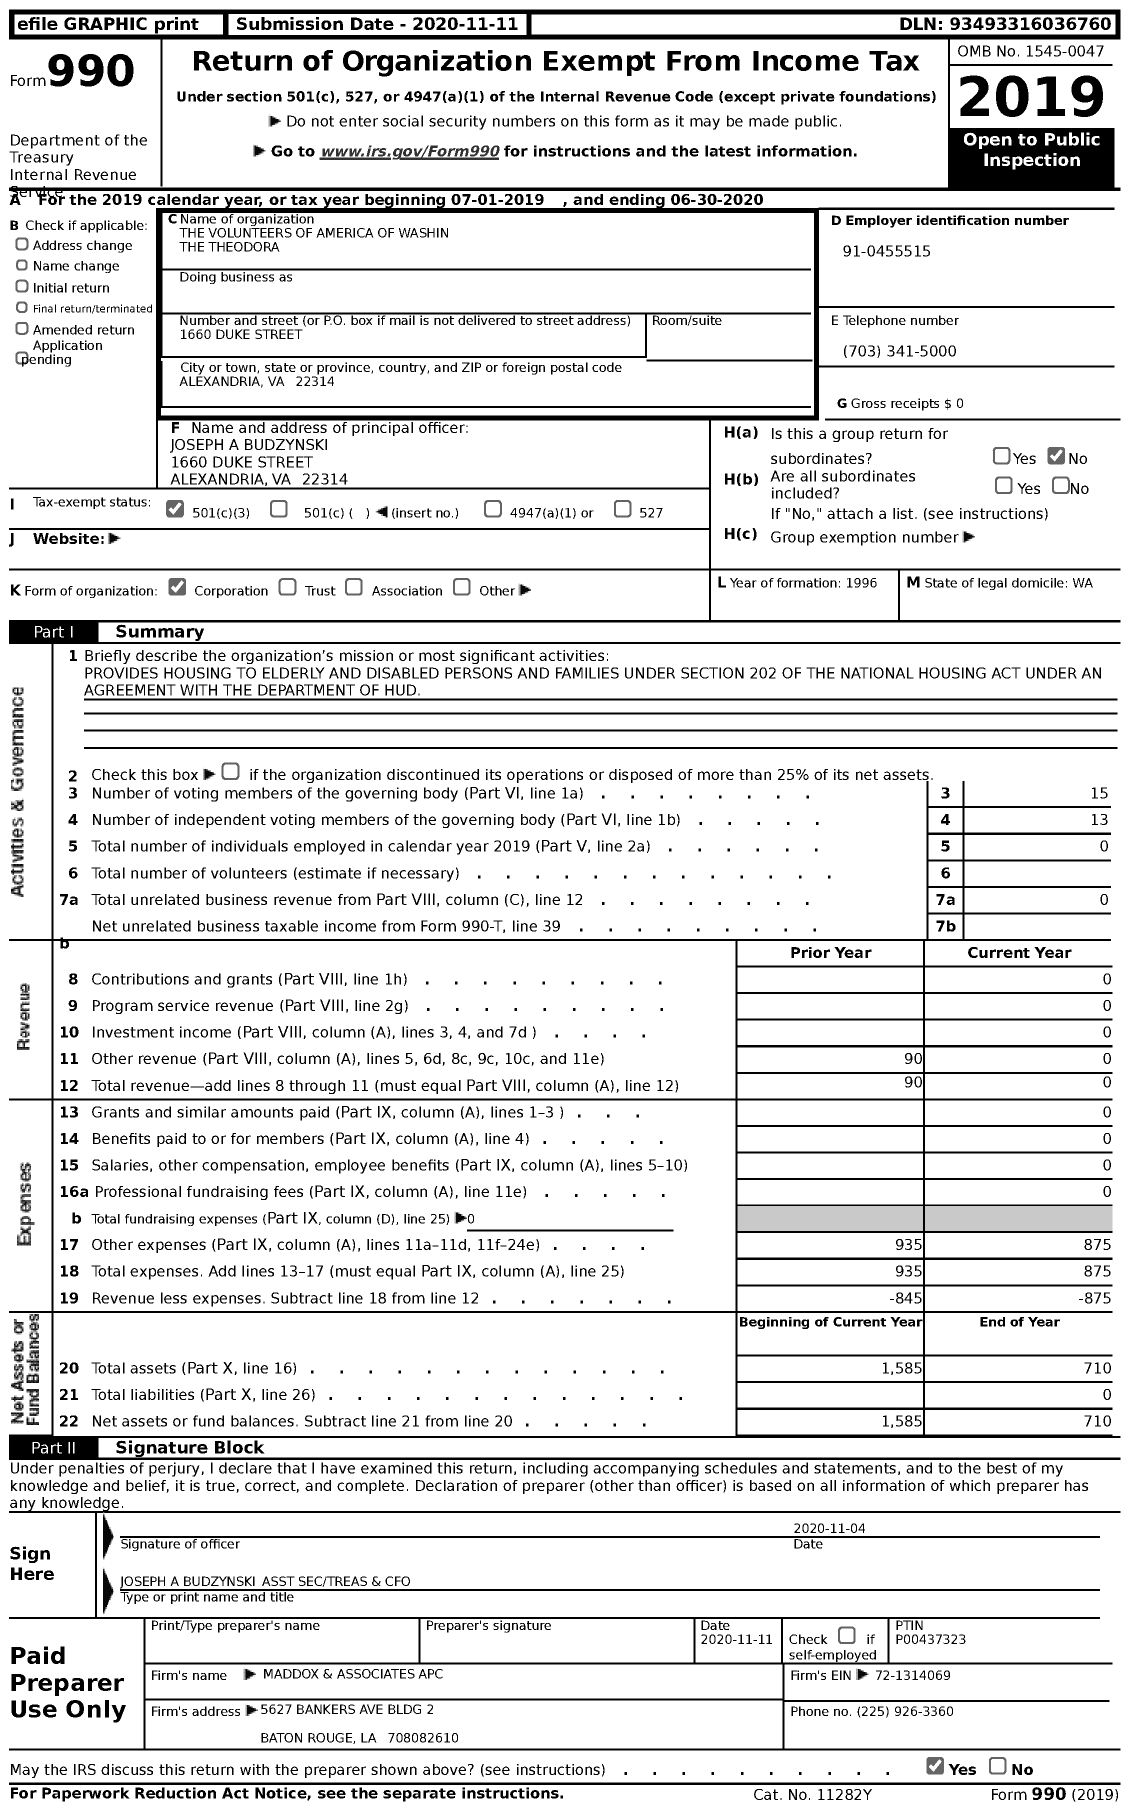 Image of first page of 2019 Form 990 for The Volunteers of America of Washin the Theodora (VOA)